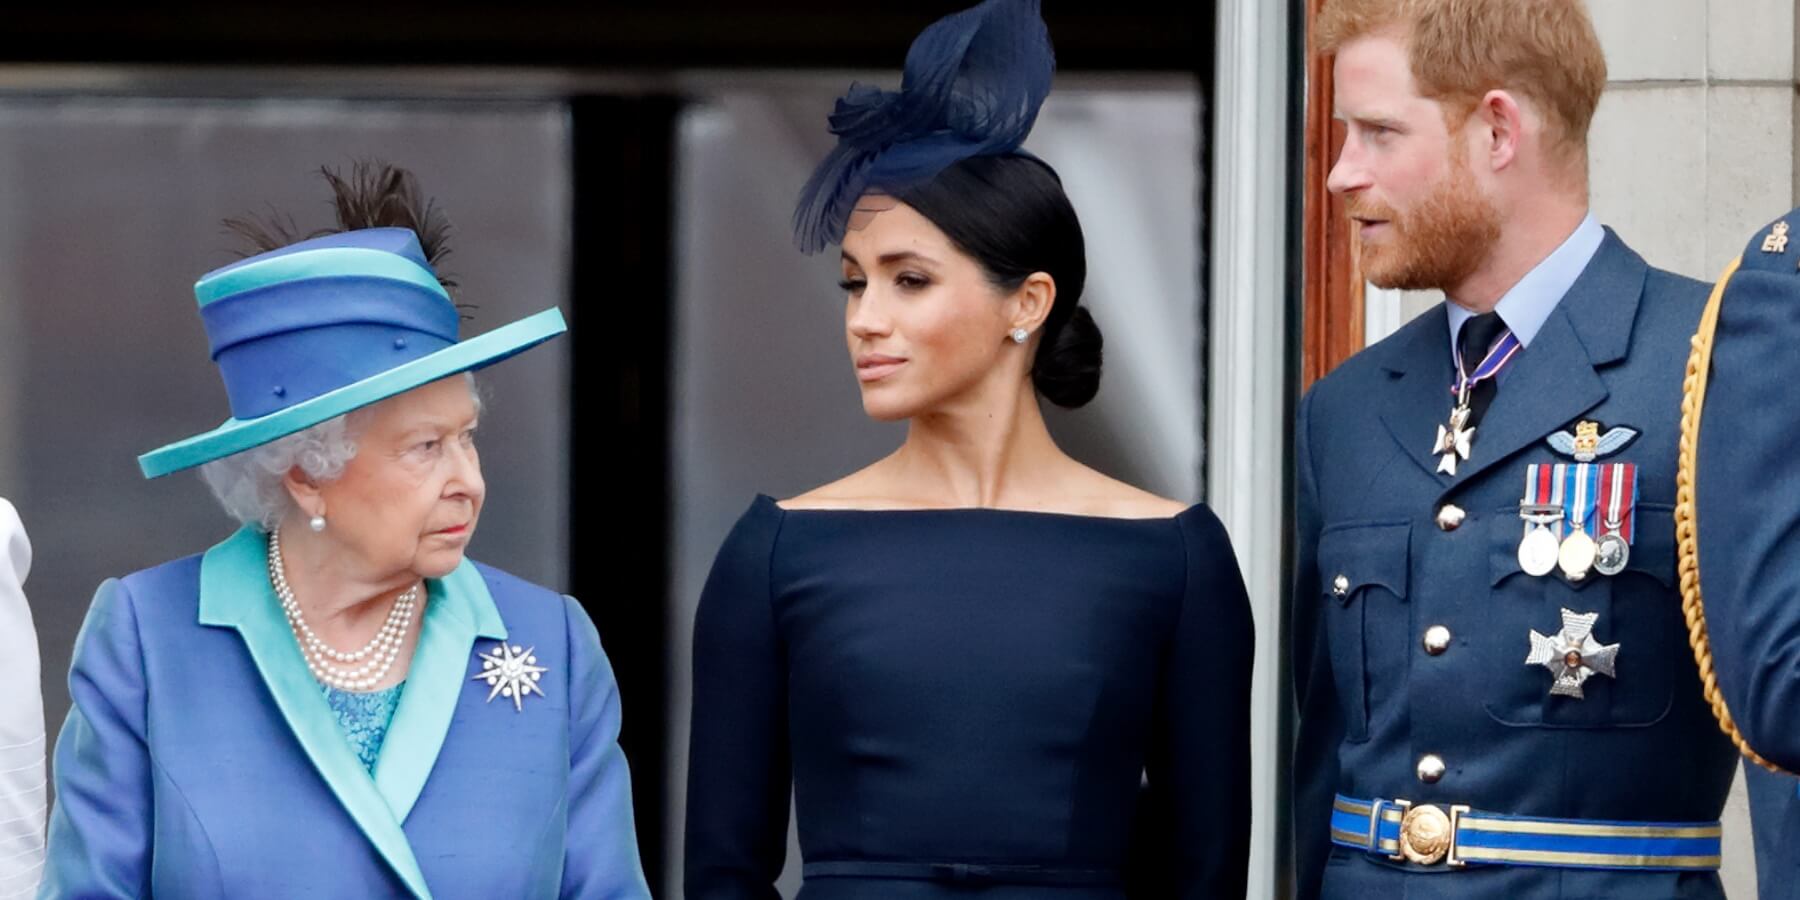 Queen Elizabeth, Meghan Markle, and Prince Harry on the Buckingham Palace balcony in 2018.